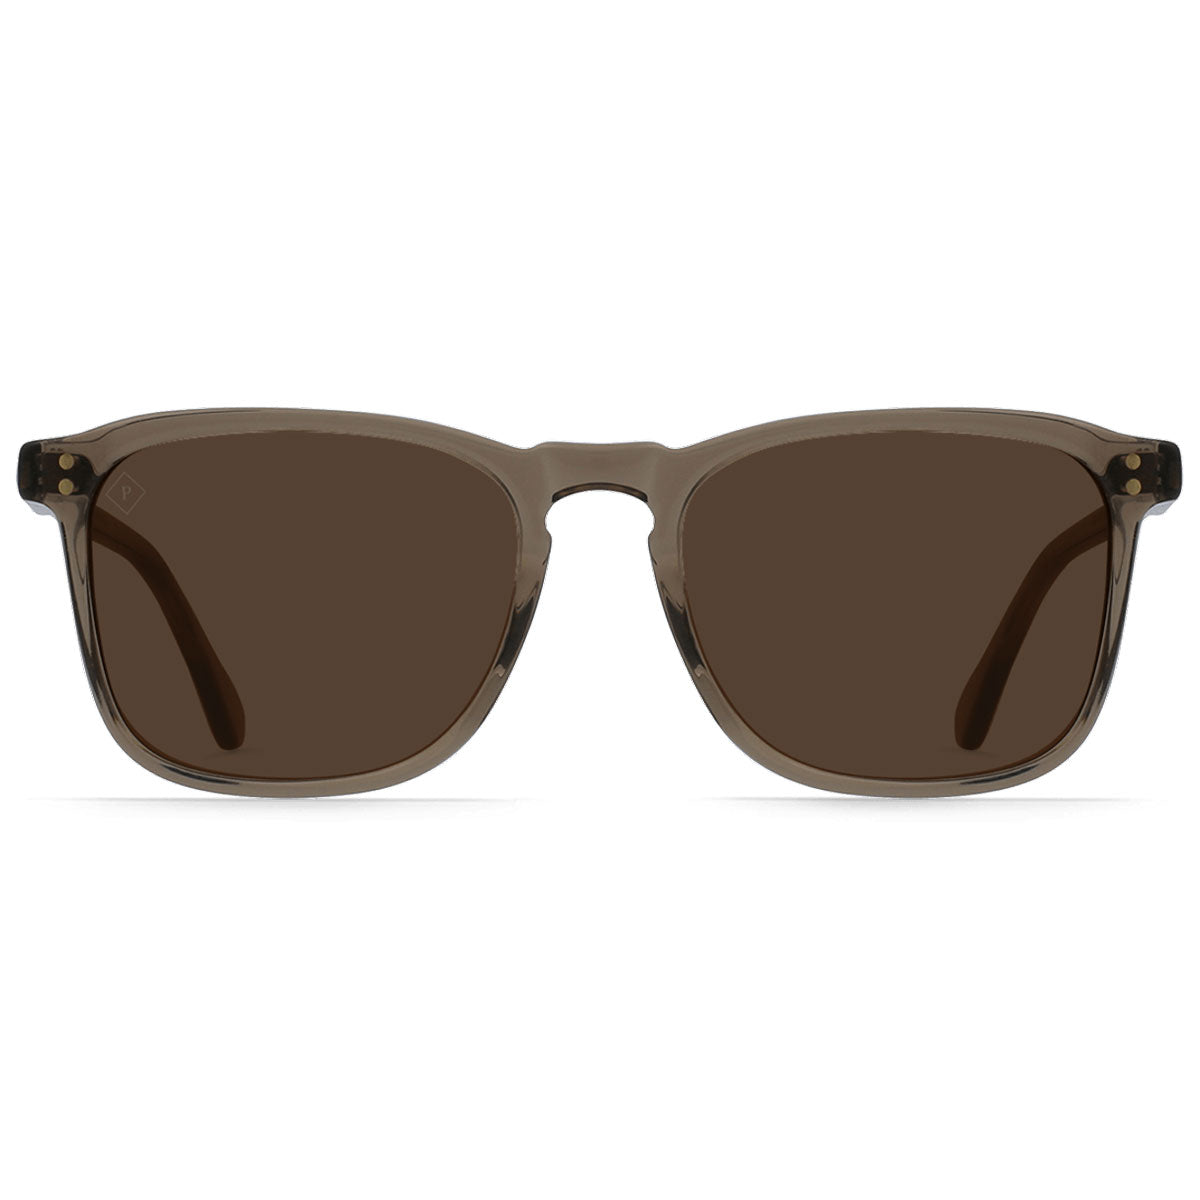 Raen Wiley Sunglasses - Ghost/Vibrant Brown Polarized image 3